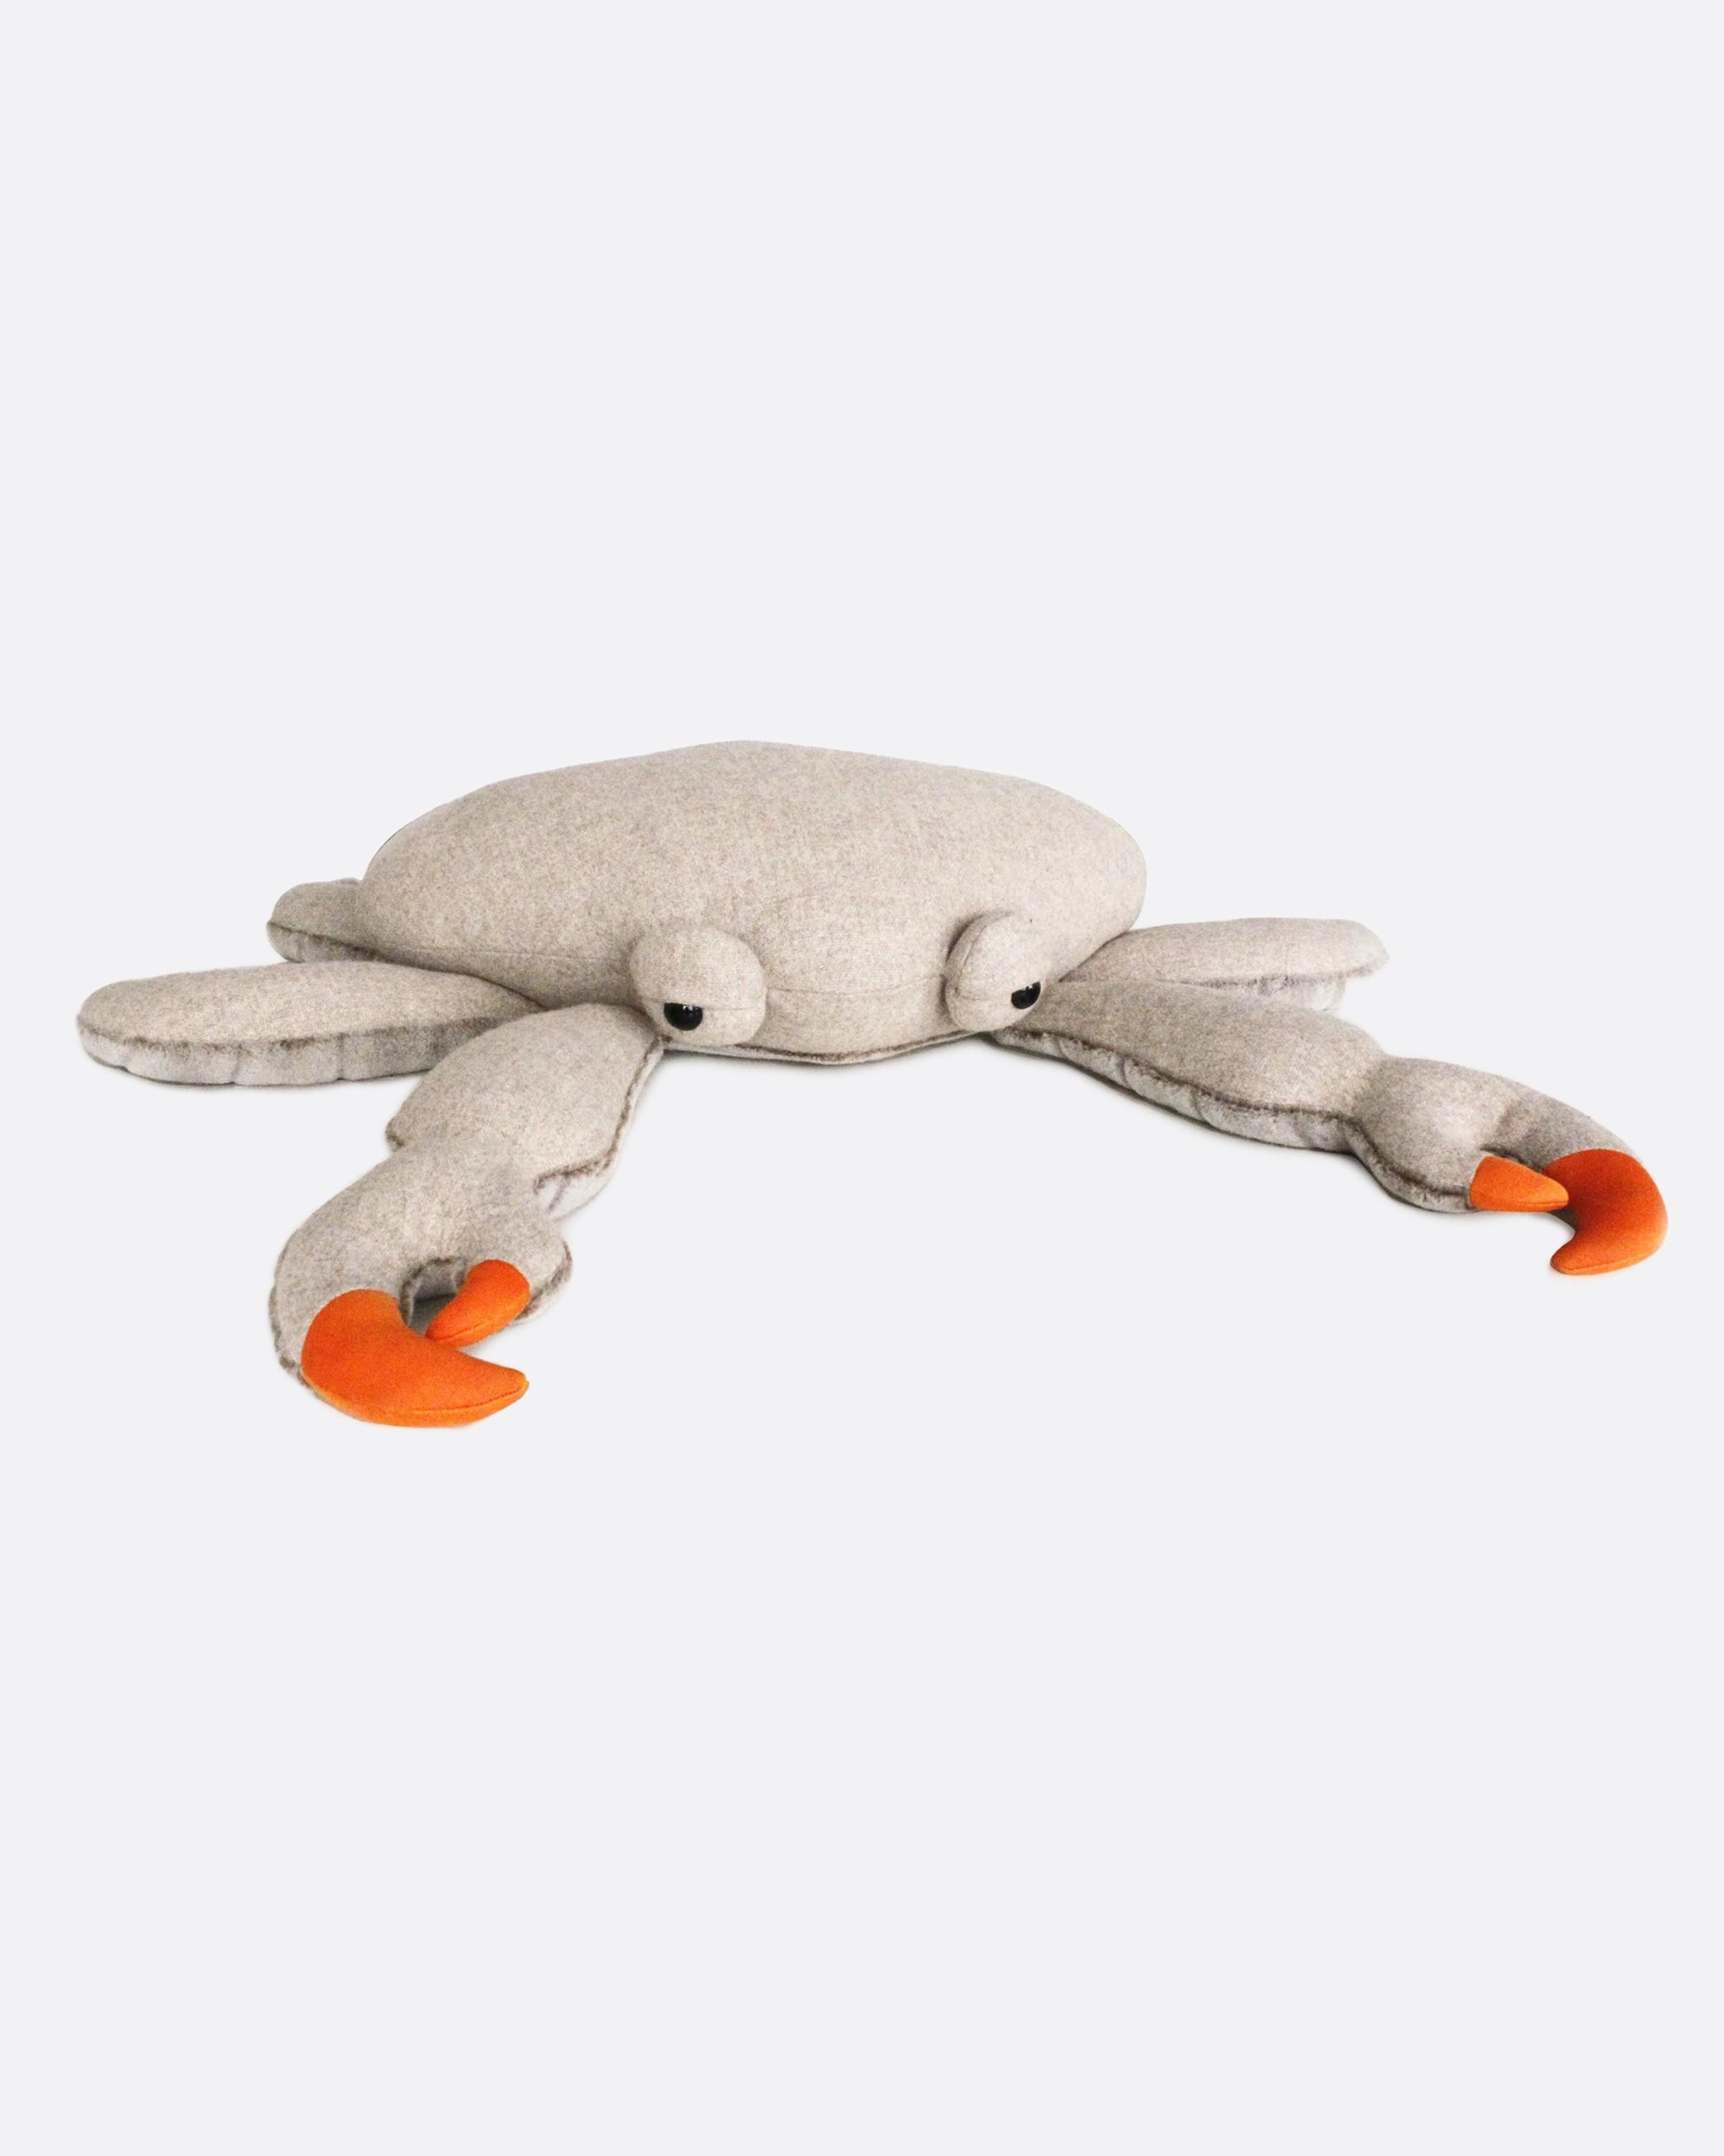 With its long fluffy legs and claws, this huge crab can be both a playmate and a benevolent guardian.